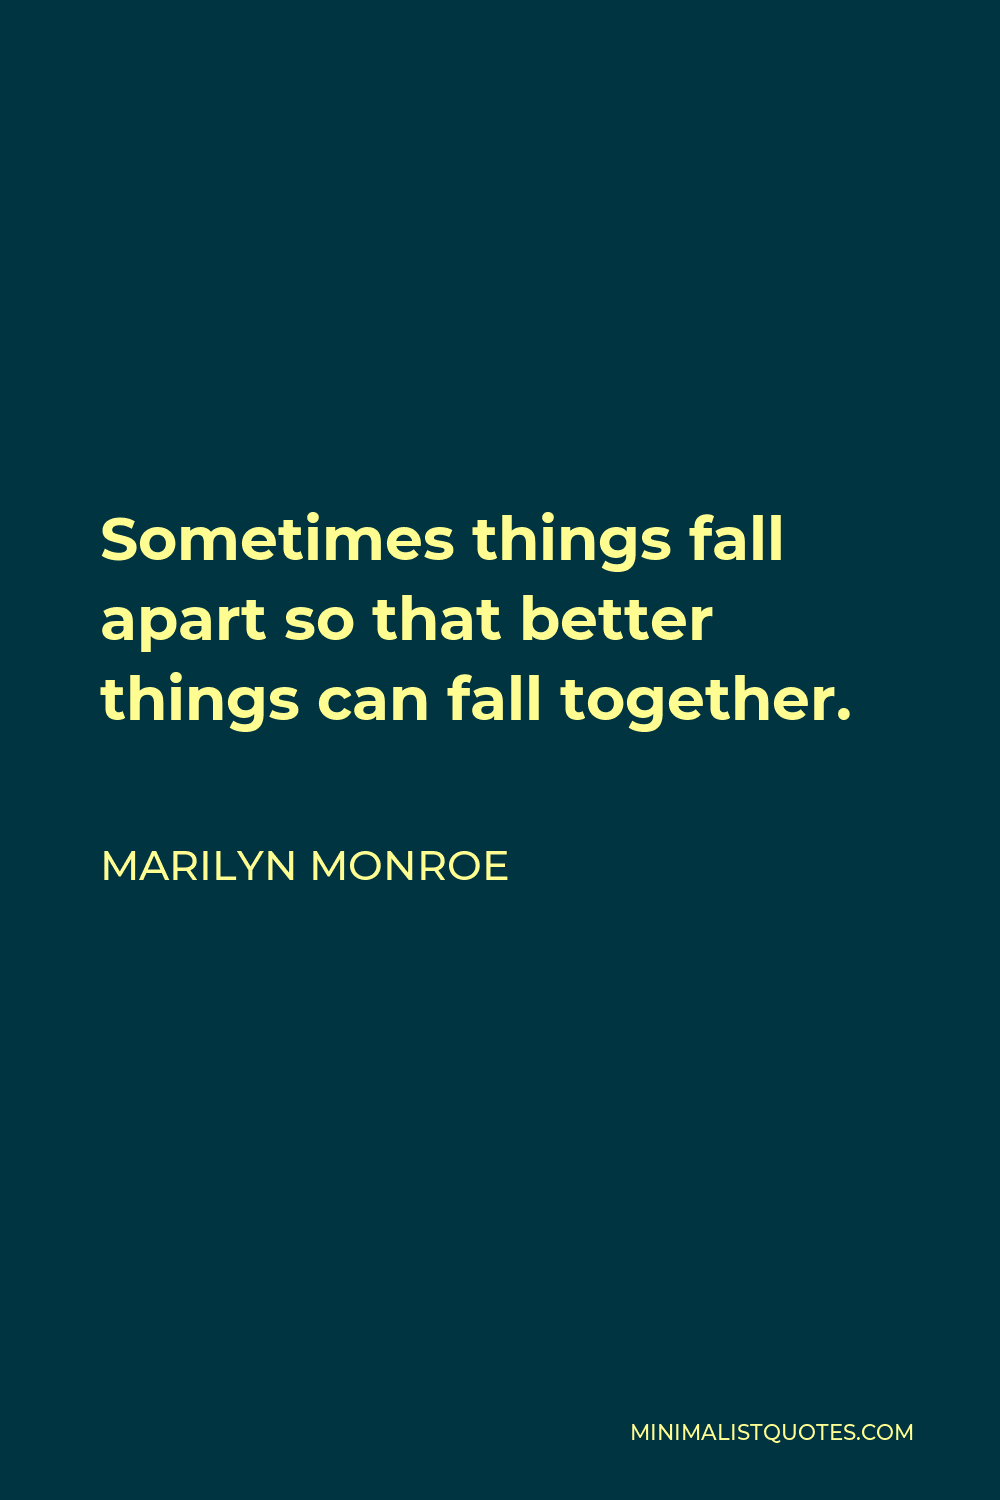 Marilyn Monroe Quote - Sometimes things fall apart so that better things can fall together.